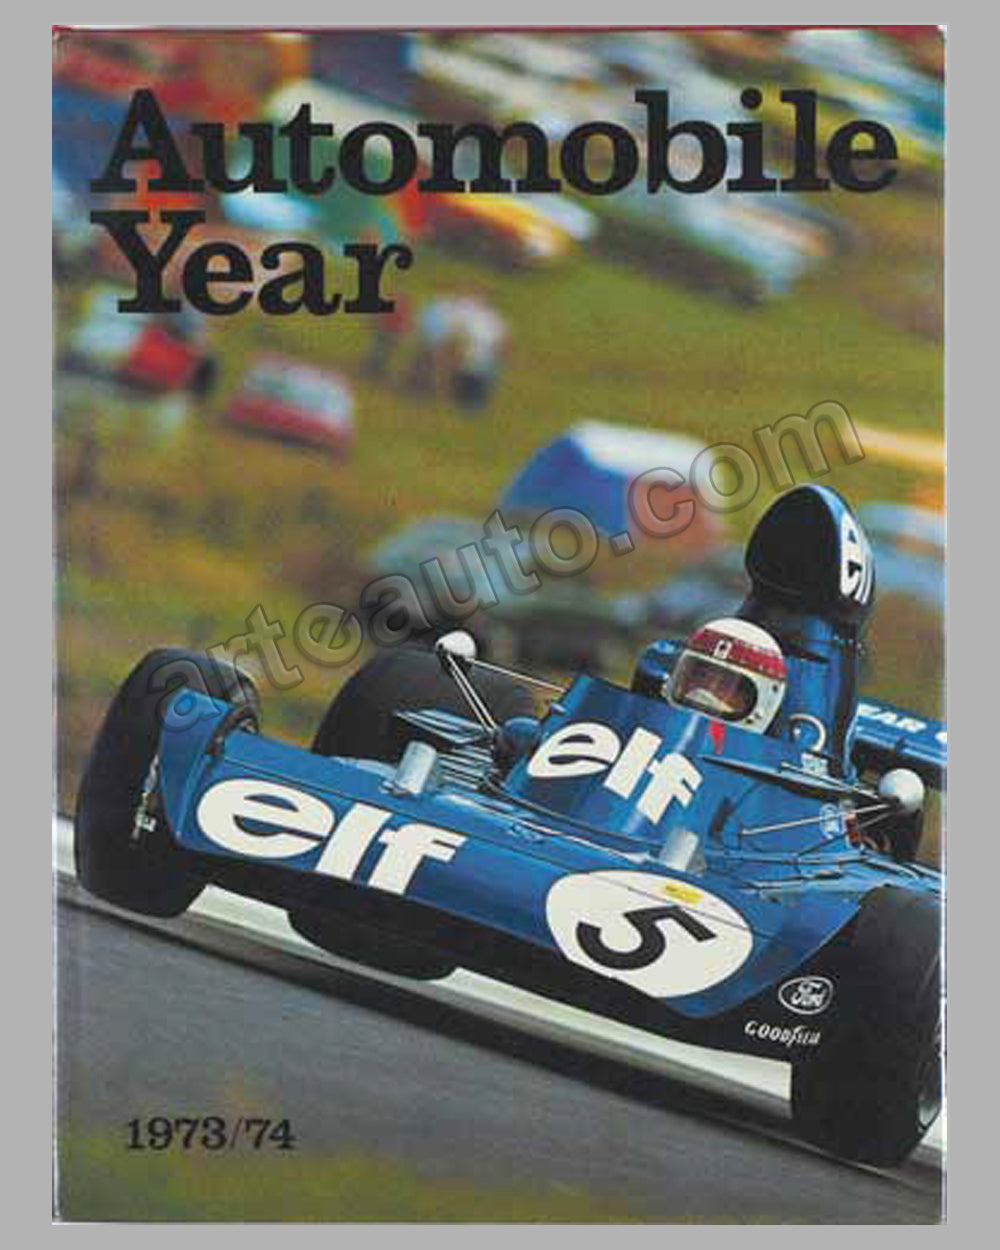 Automobile Year #21 1973-1974 book published by Edita S.A.